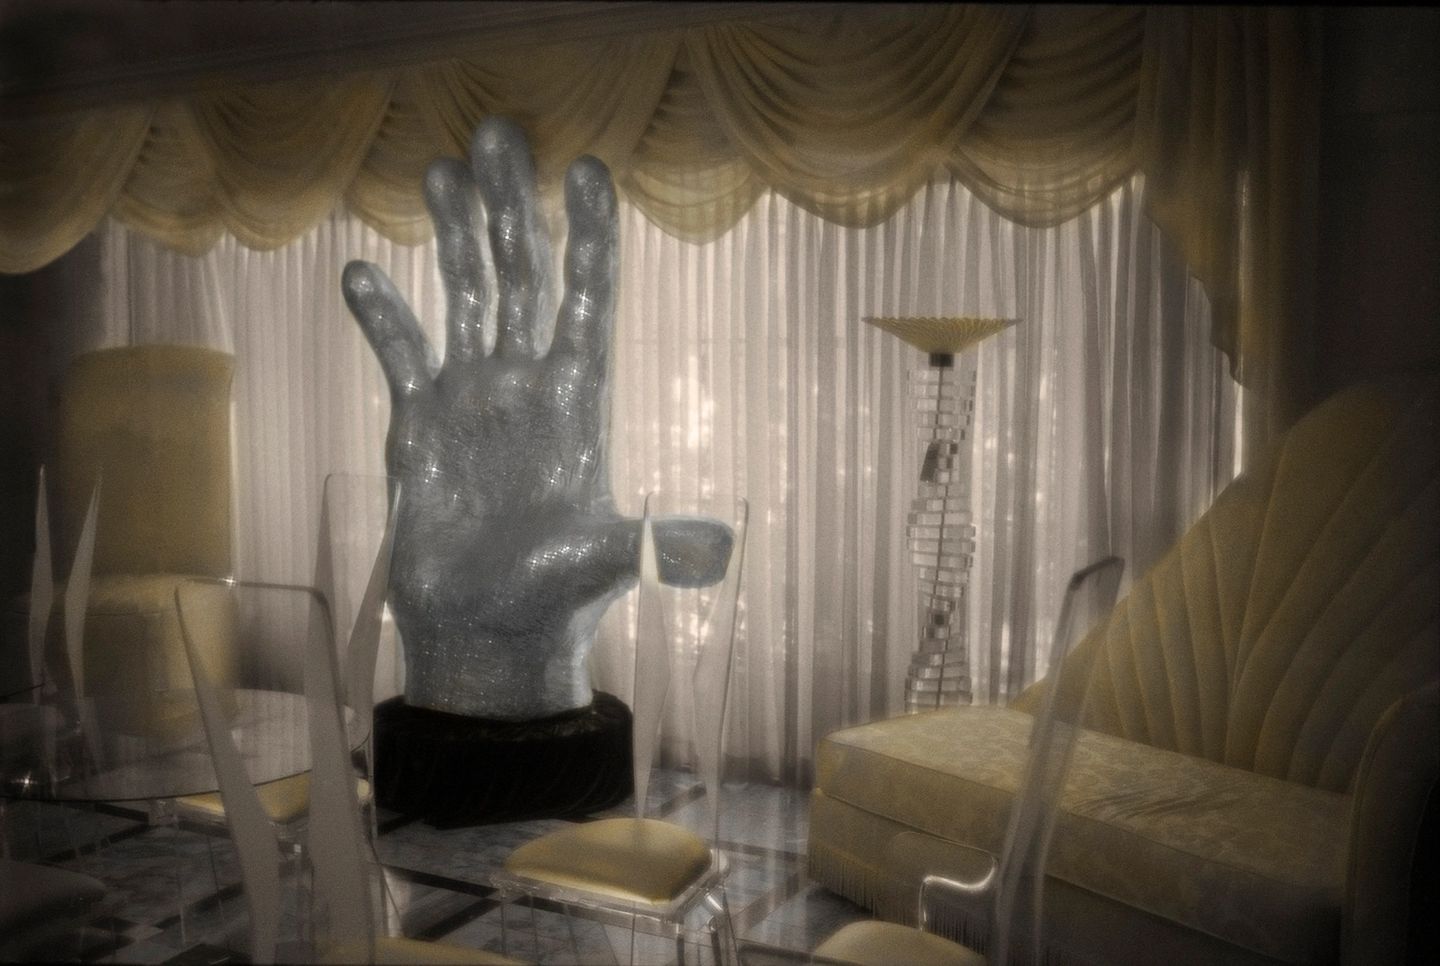 A large hand sculpture in the middle of a room.